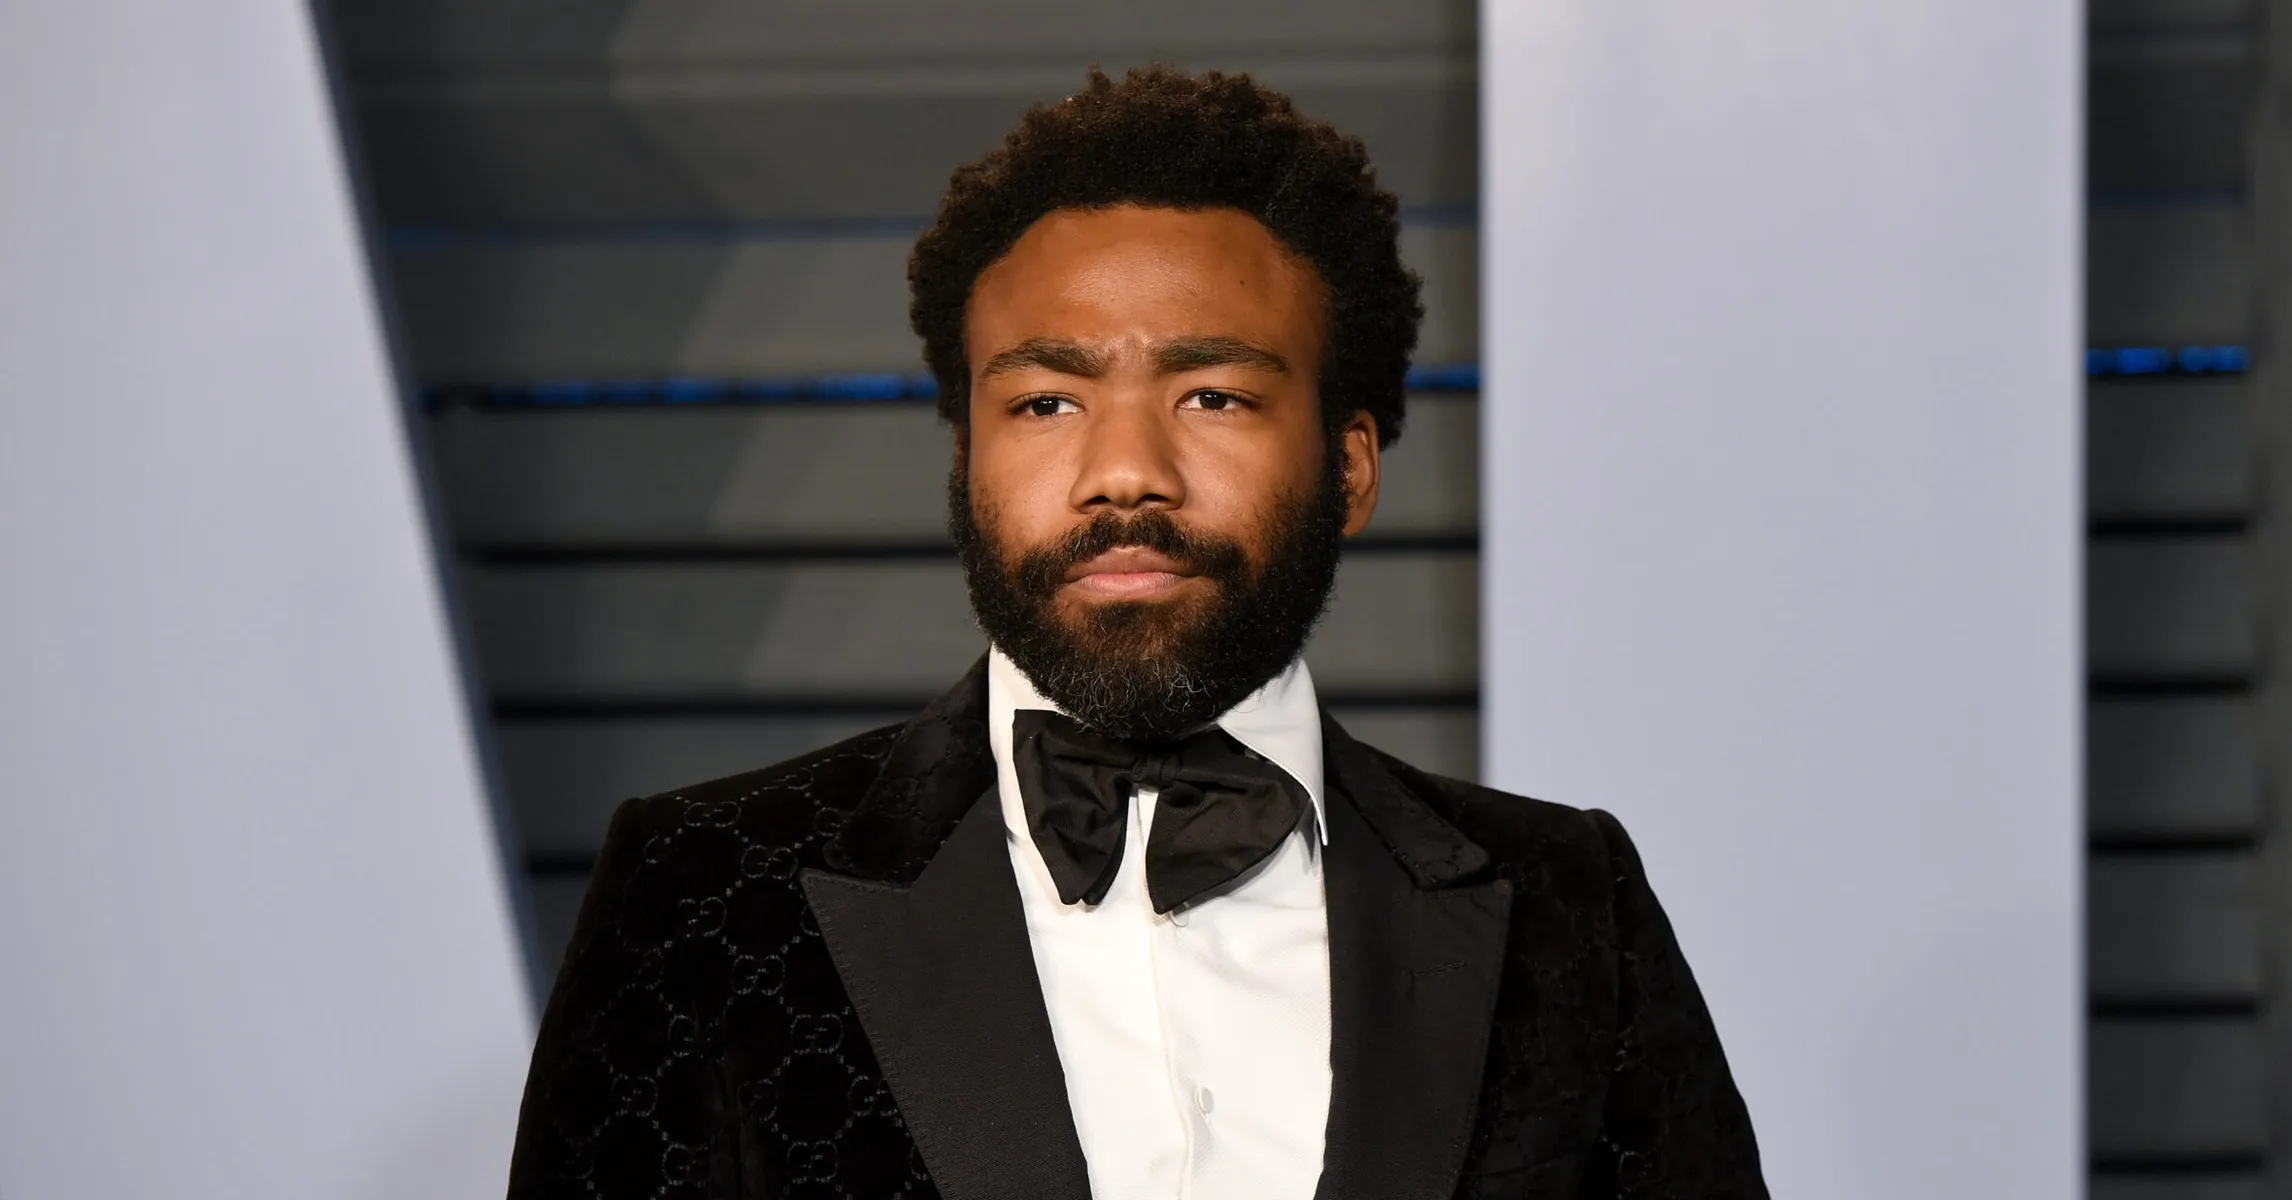 Childish Gambino Receives Second Lawsuit As Kidd Wes Continues To Fight Over “This Is America”